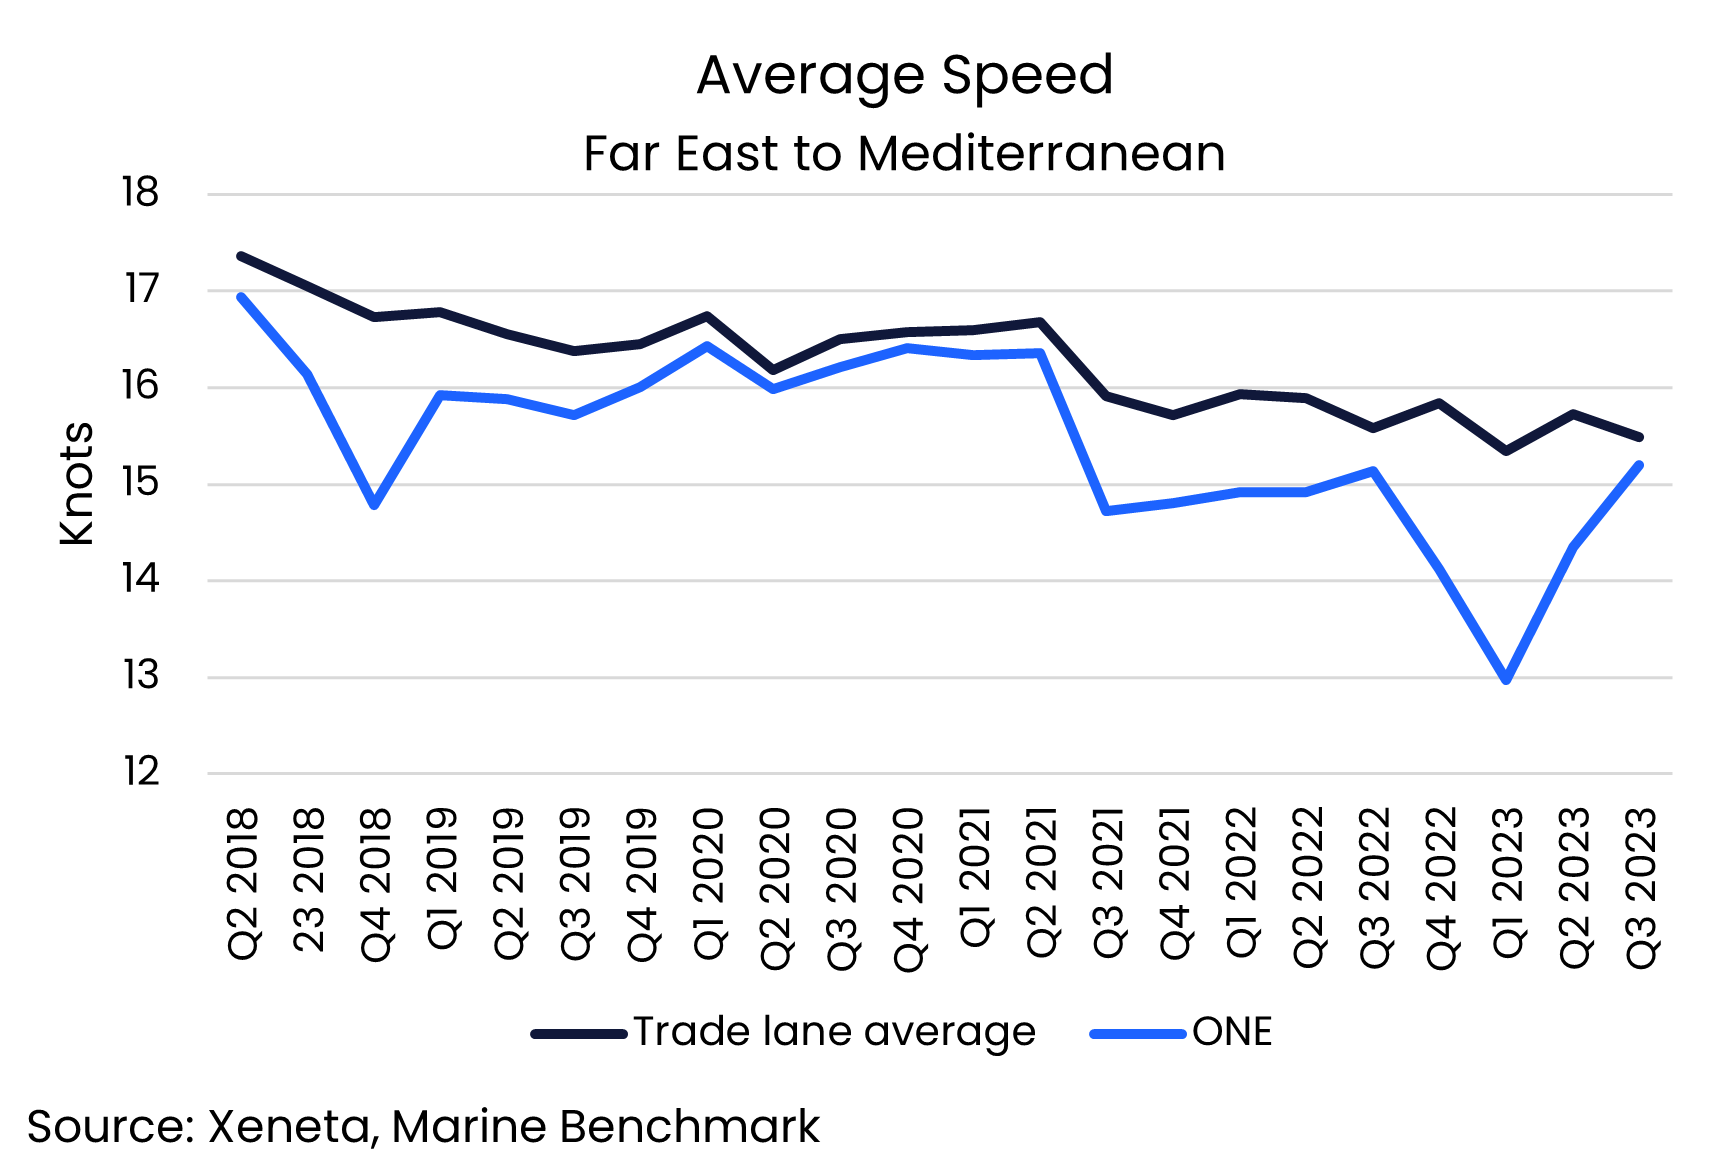 Far East to Mediterranean | Average Speed of container ship